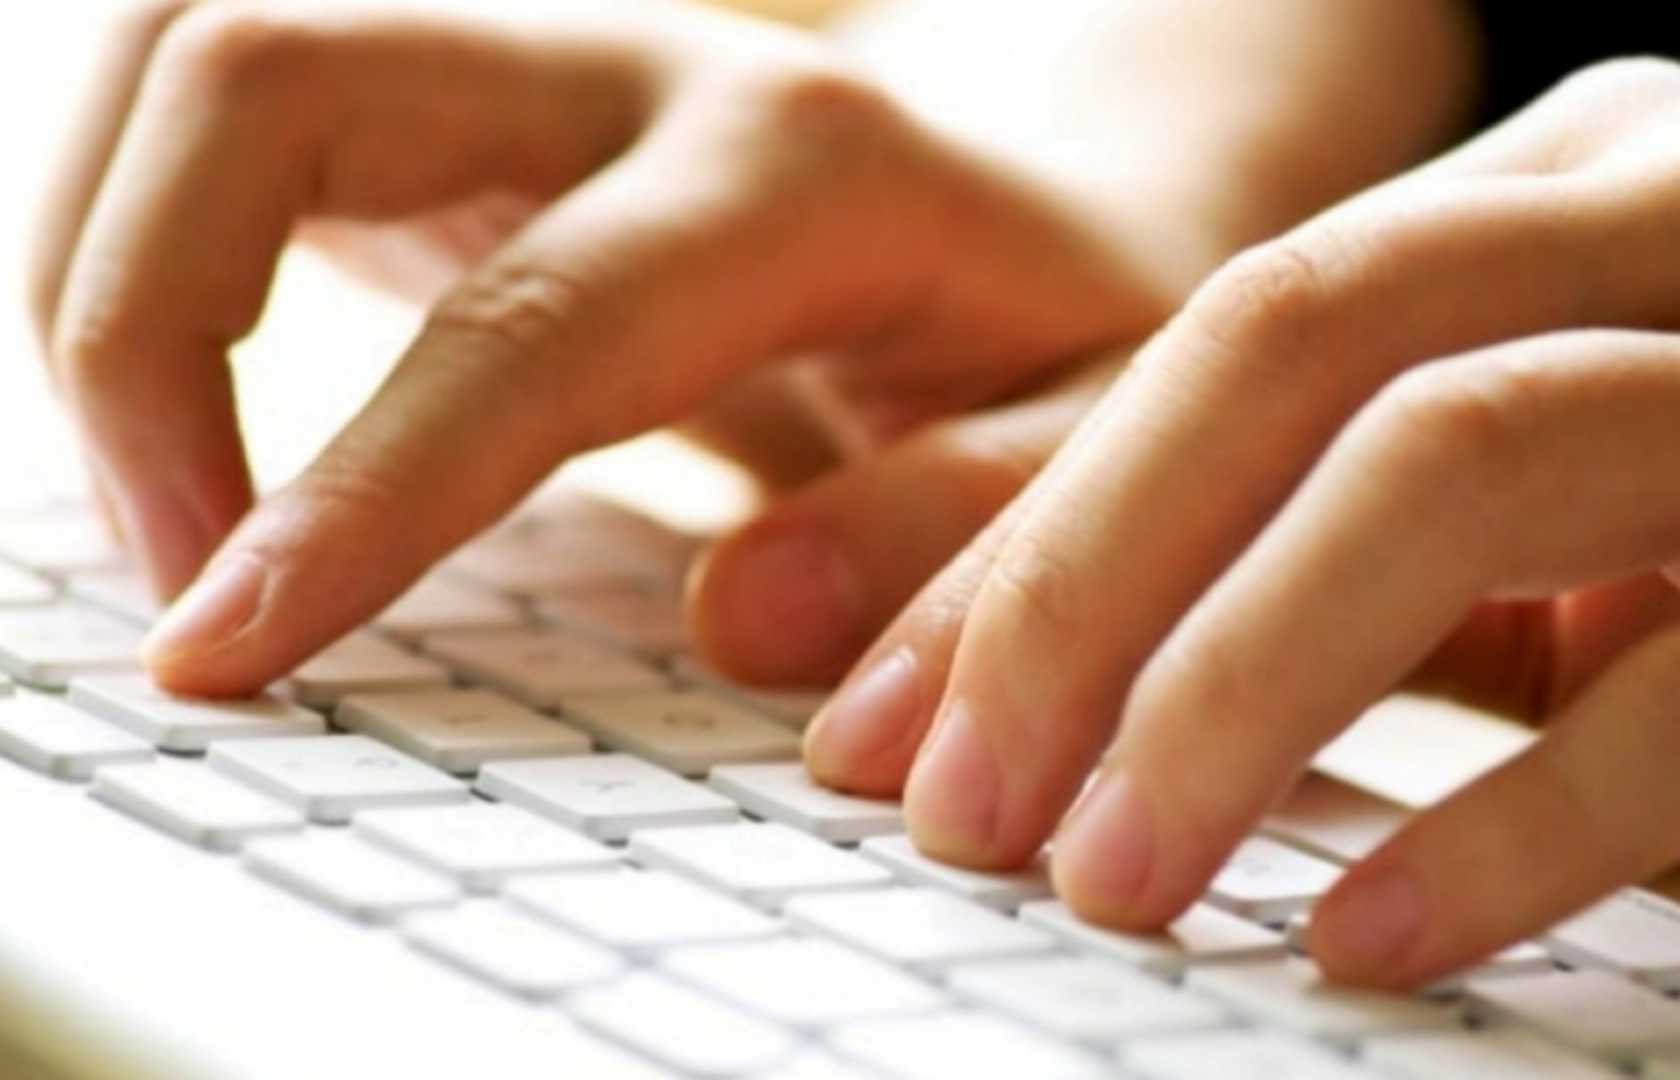 10 fast typing fingers